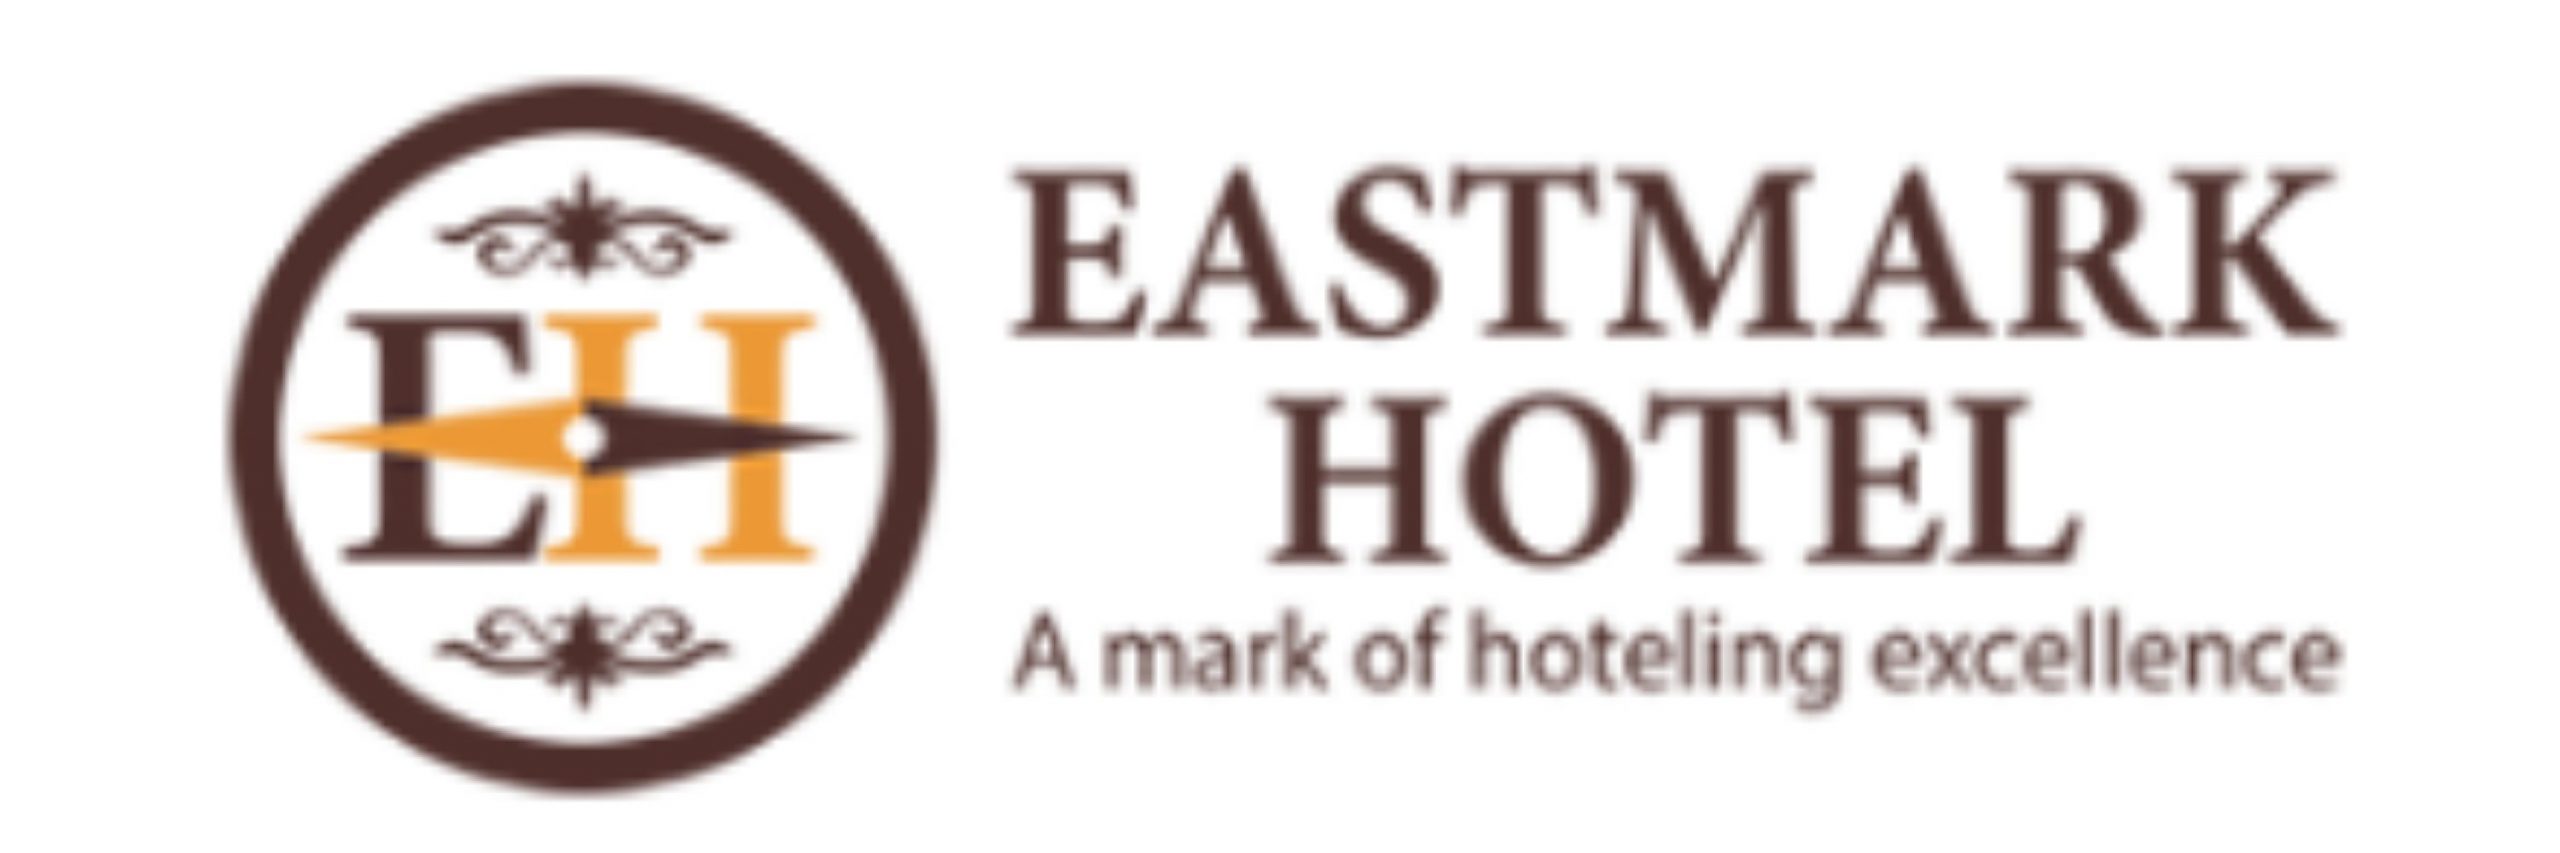 Eastmark Hotel | a mark of hoteling excellence